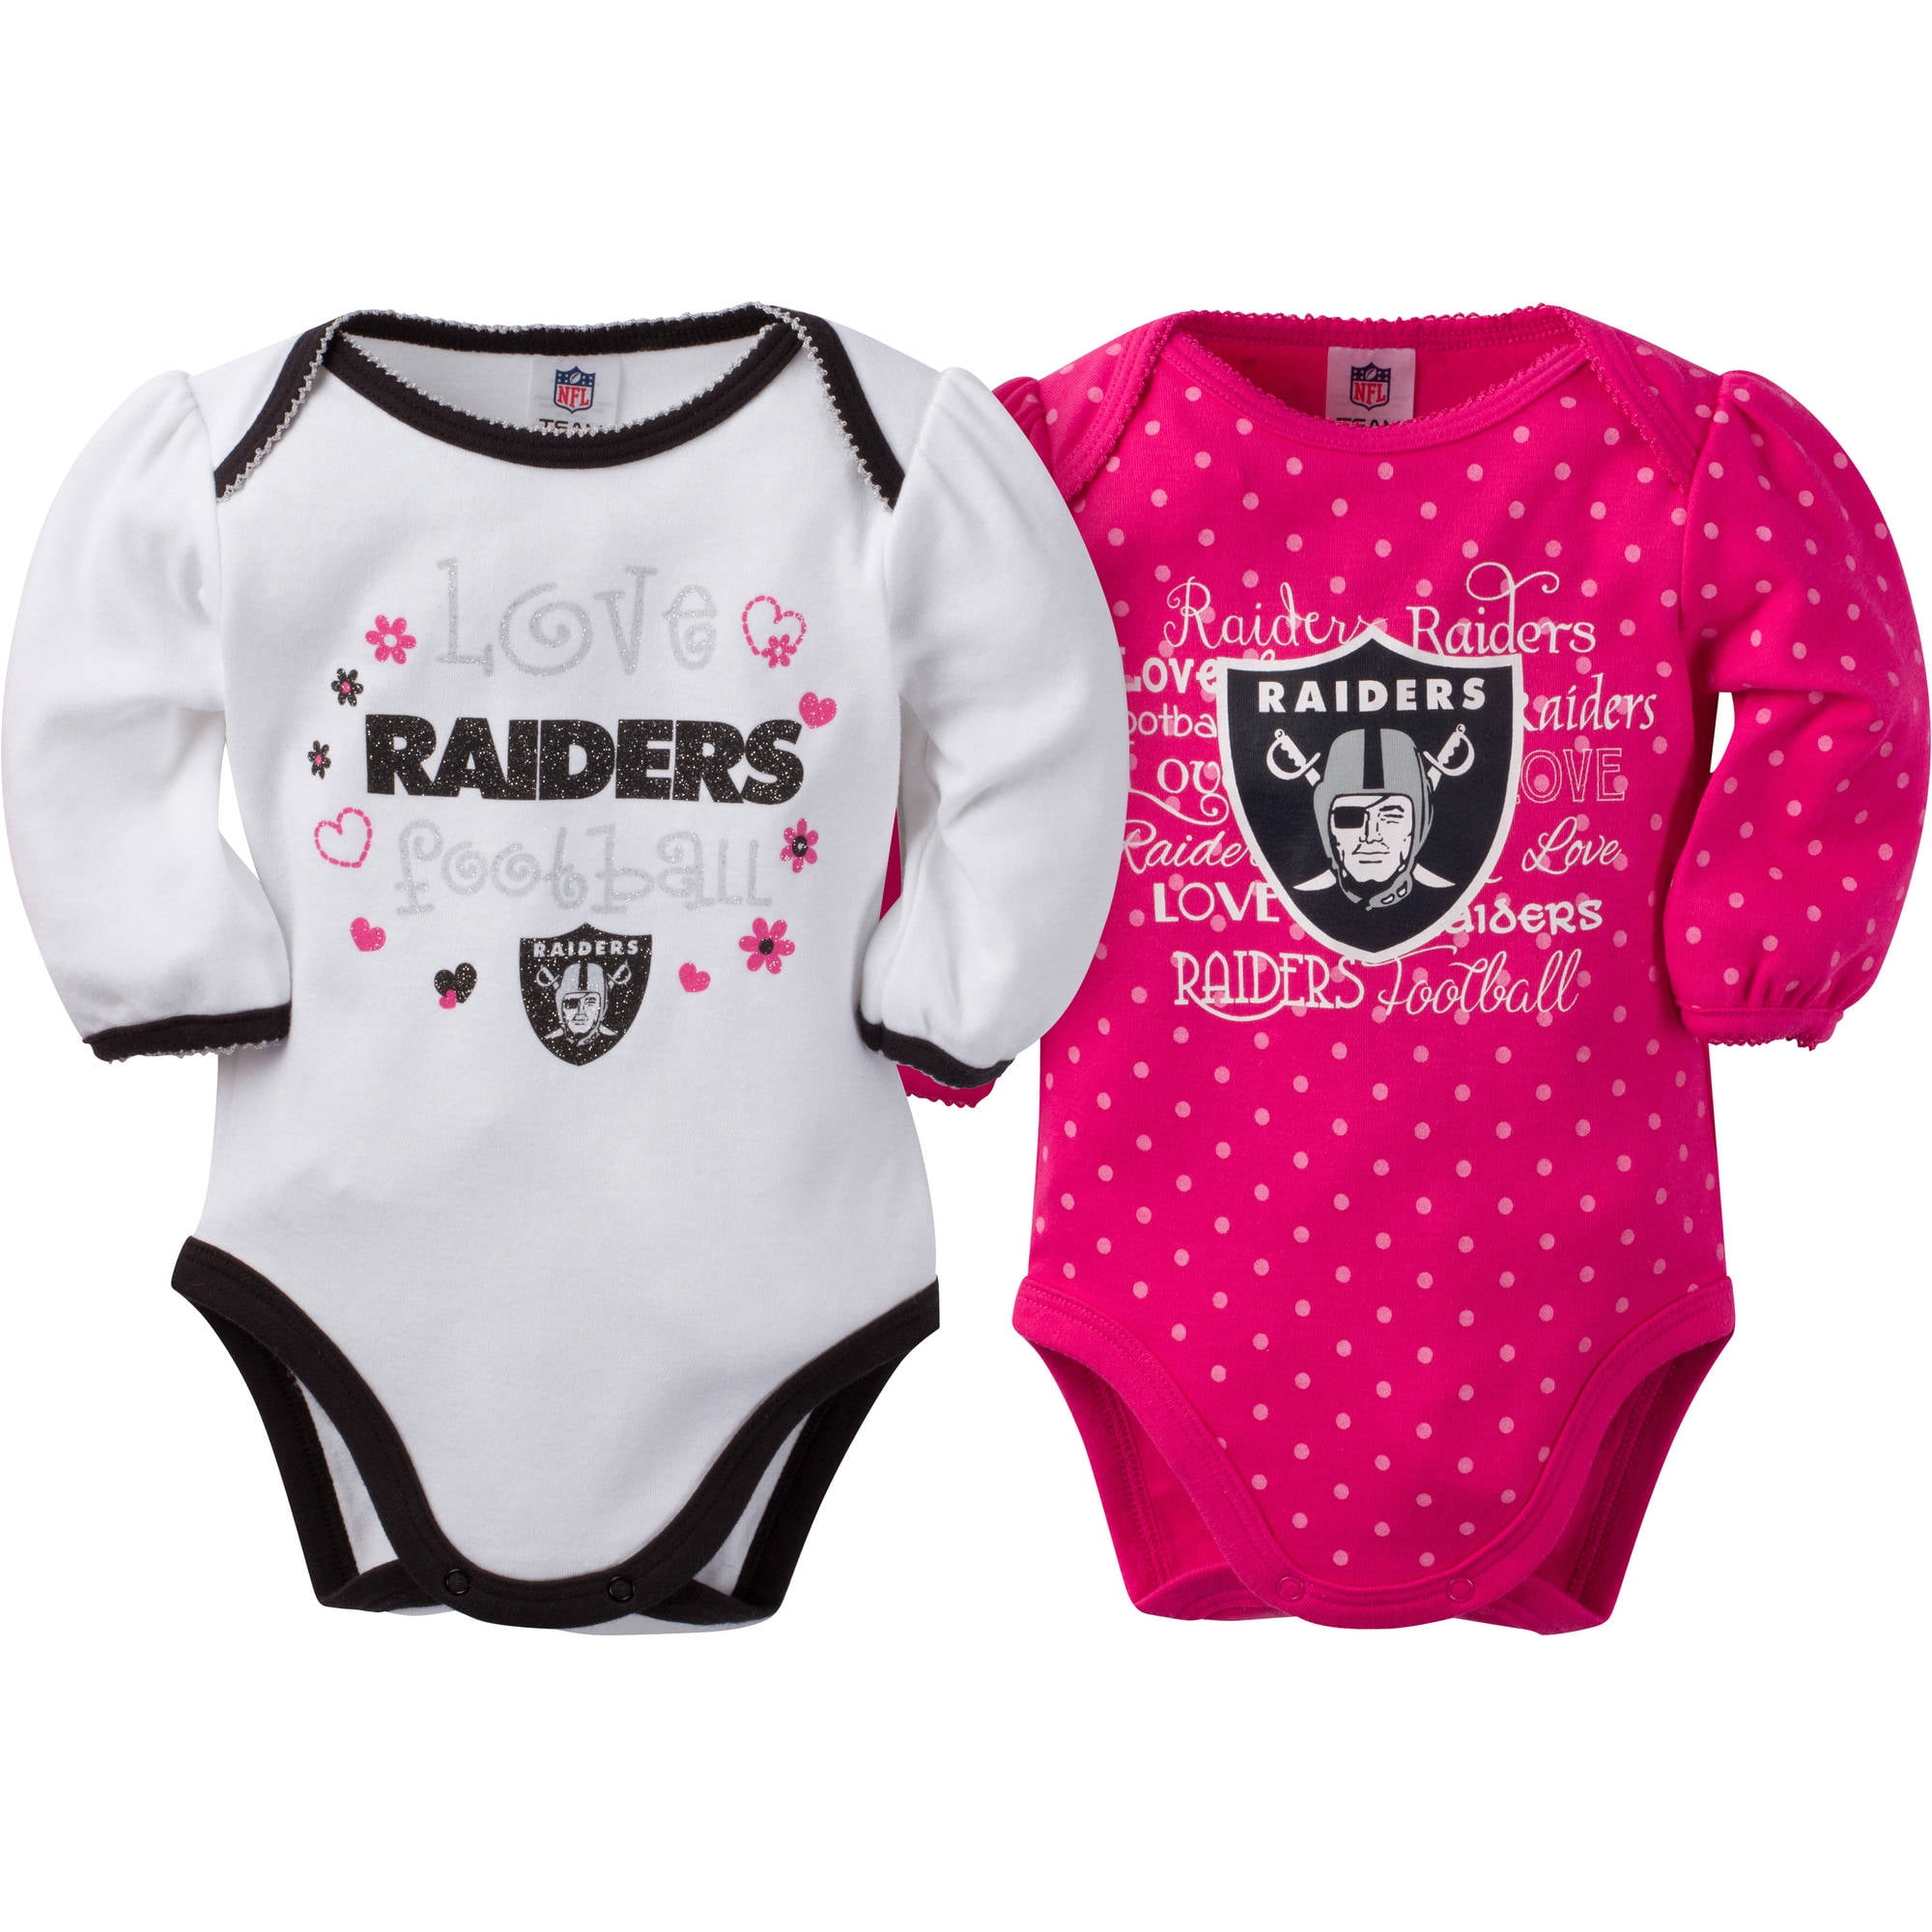  Raiders NFL Baby Clothes